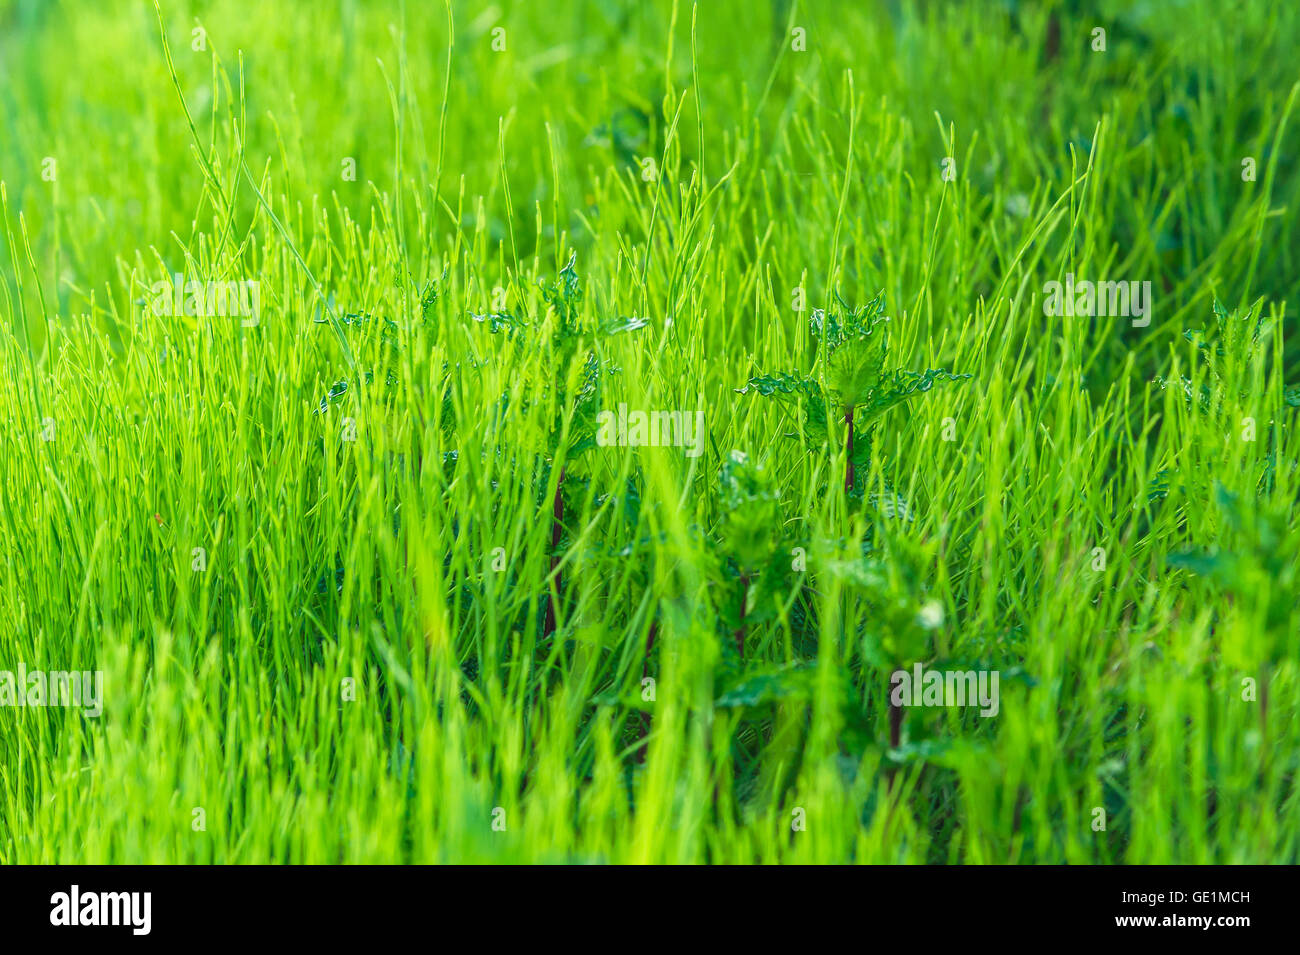 Green grass and lawn background texture Stock Photo